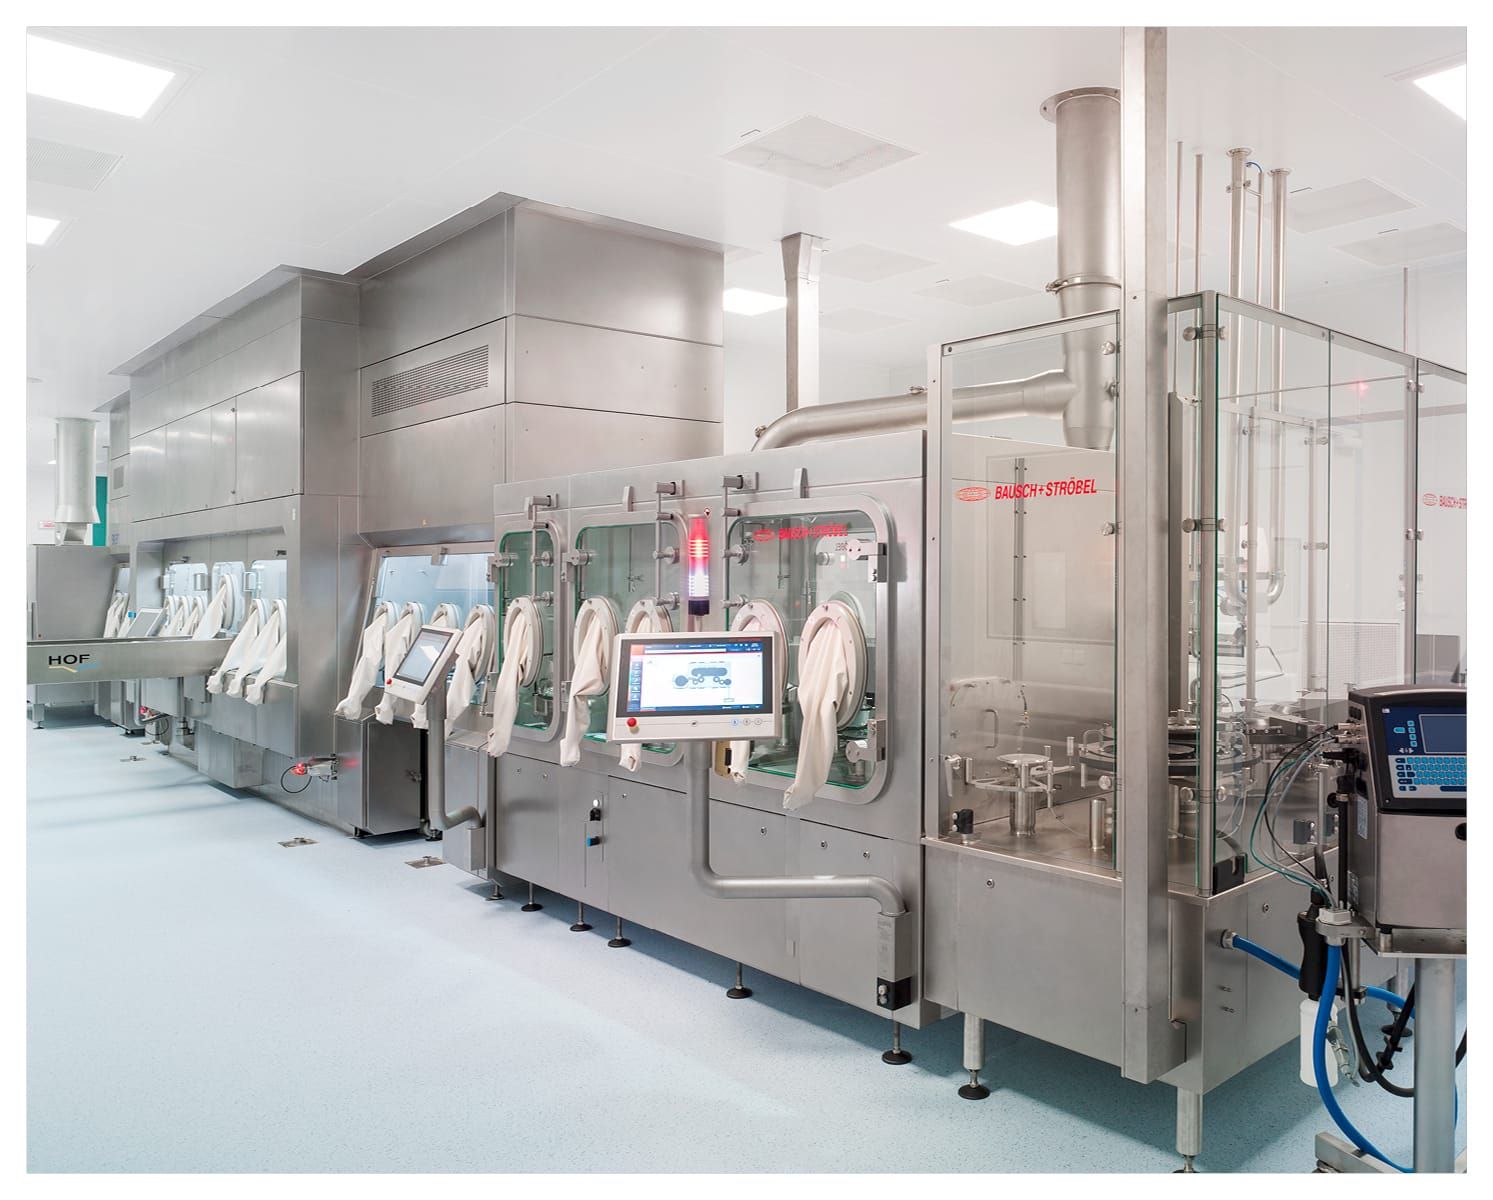 State-of-the-art Drug Product Manufacturing Facility